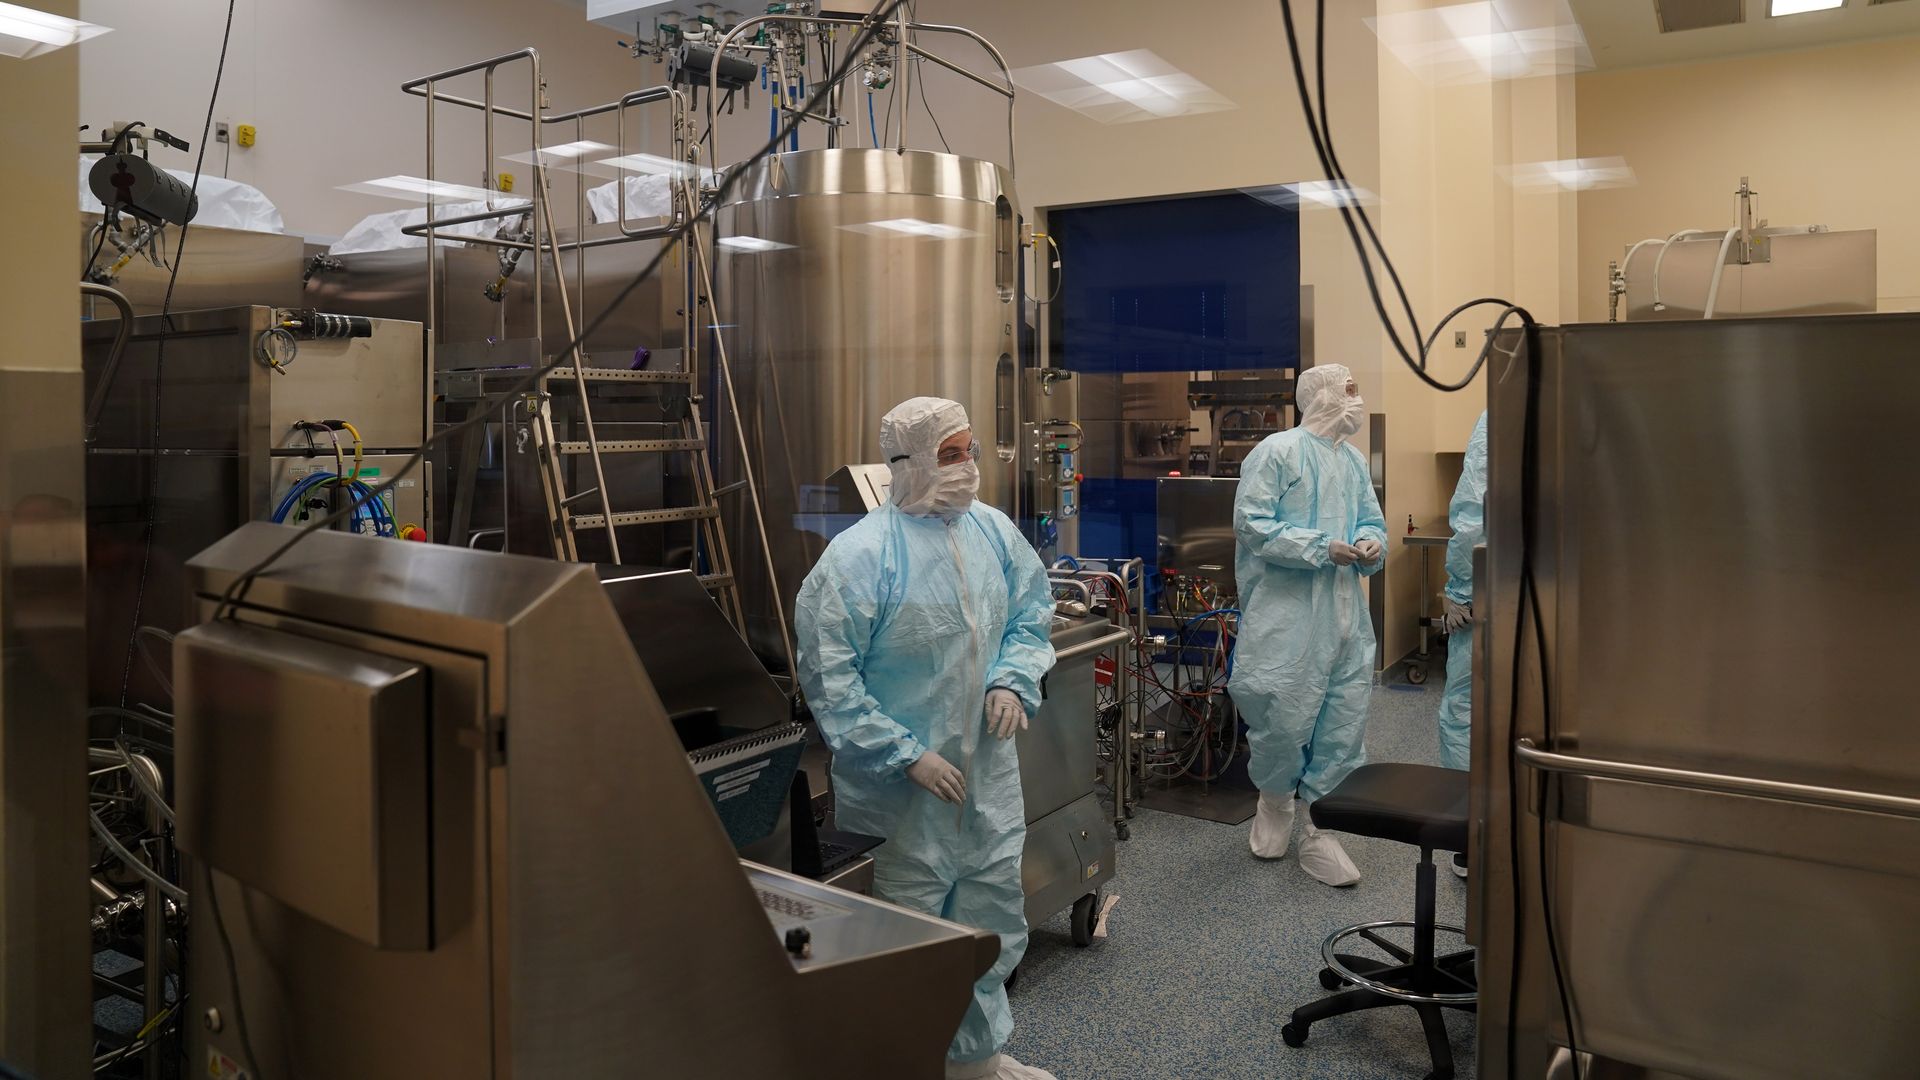 8 Employees work in a lab at Emergent Biosolutions, which is manufacturing vaccines for AstraZeneca and Johnson & Johnson on February 8, 2021 in Baltimore, Maryland.